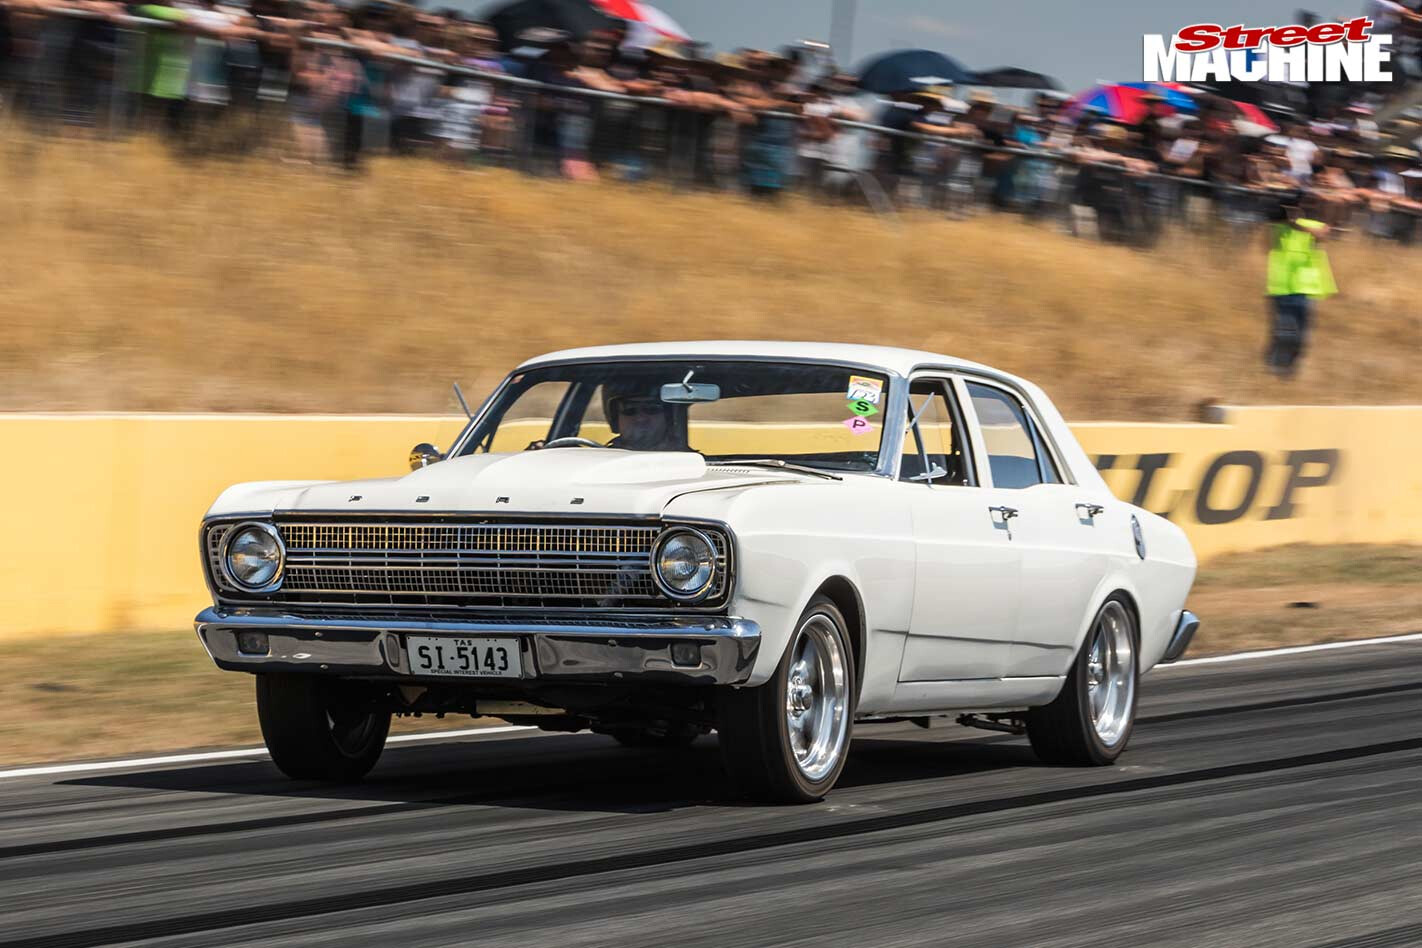 Ford Falcon at powercruise